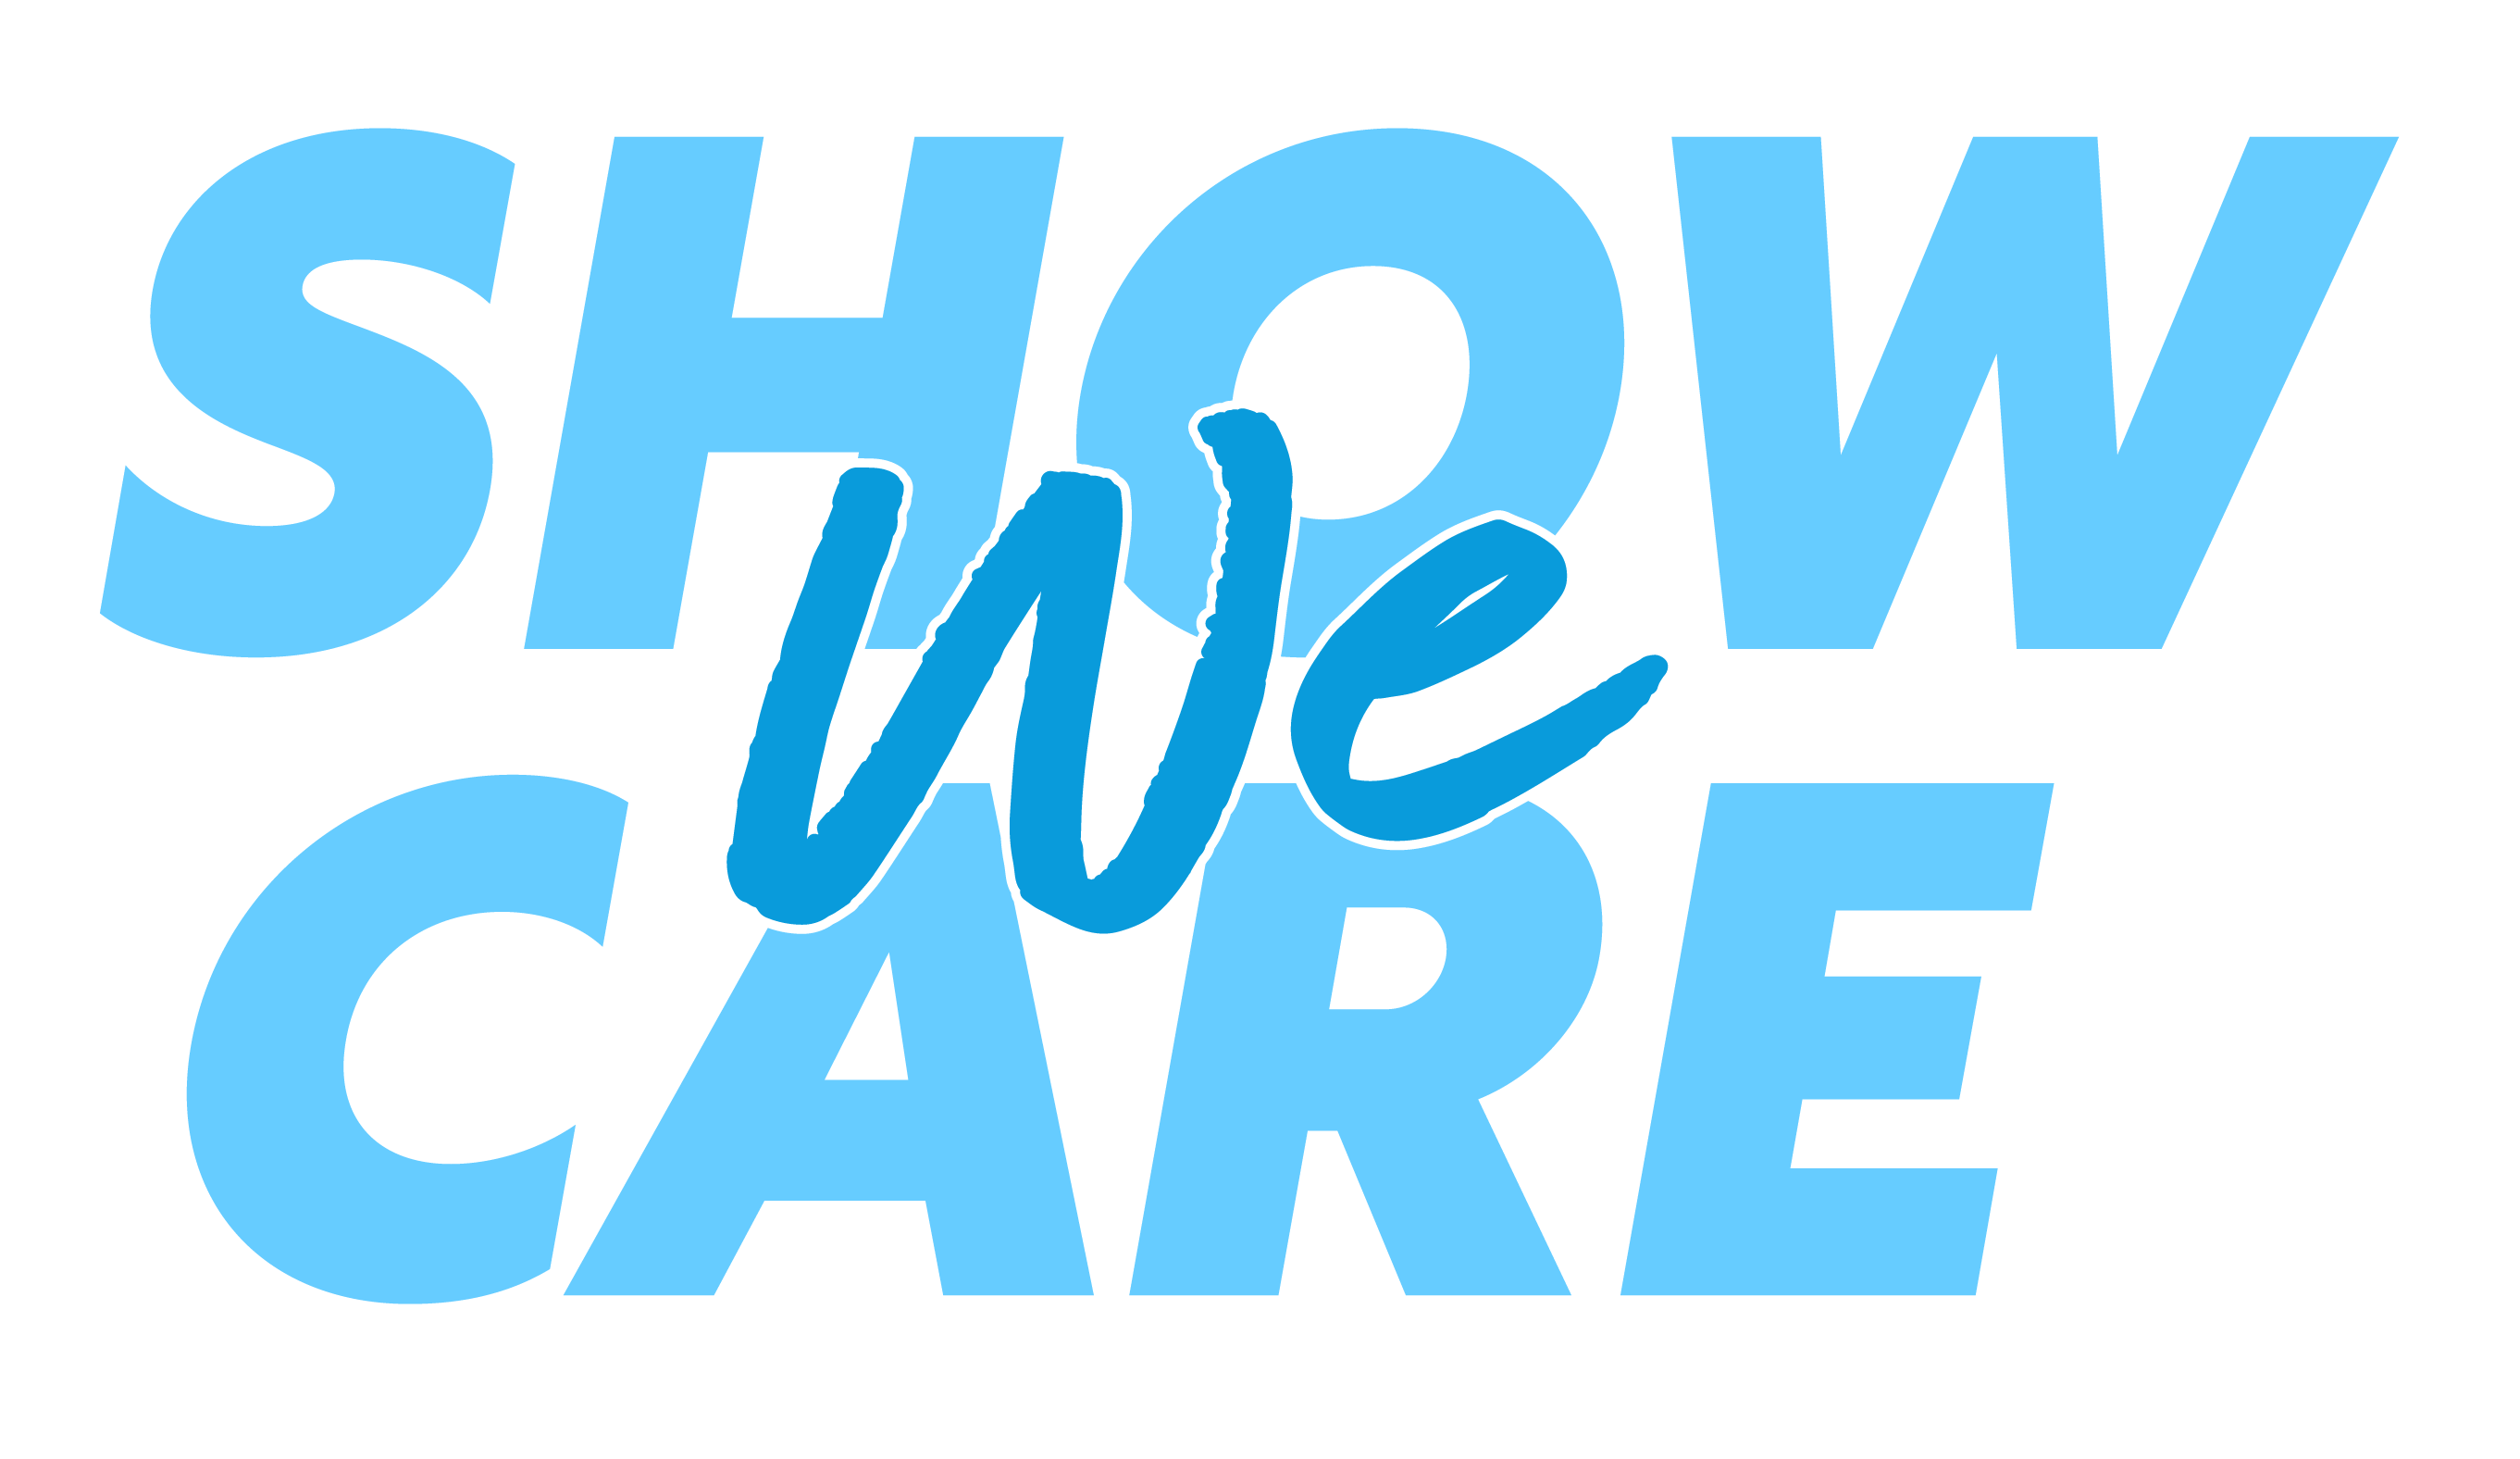 Wall of Care Logo